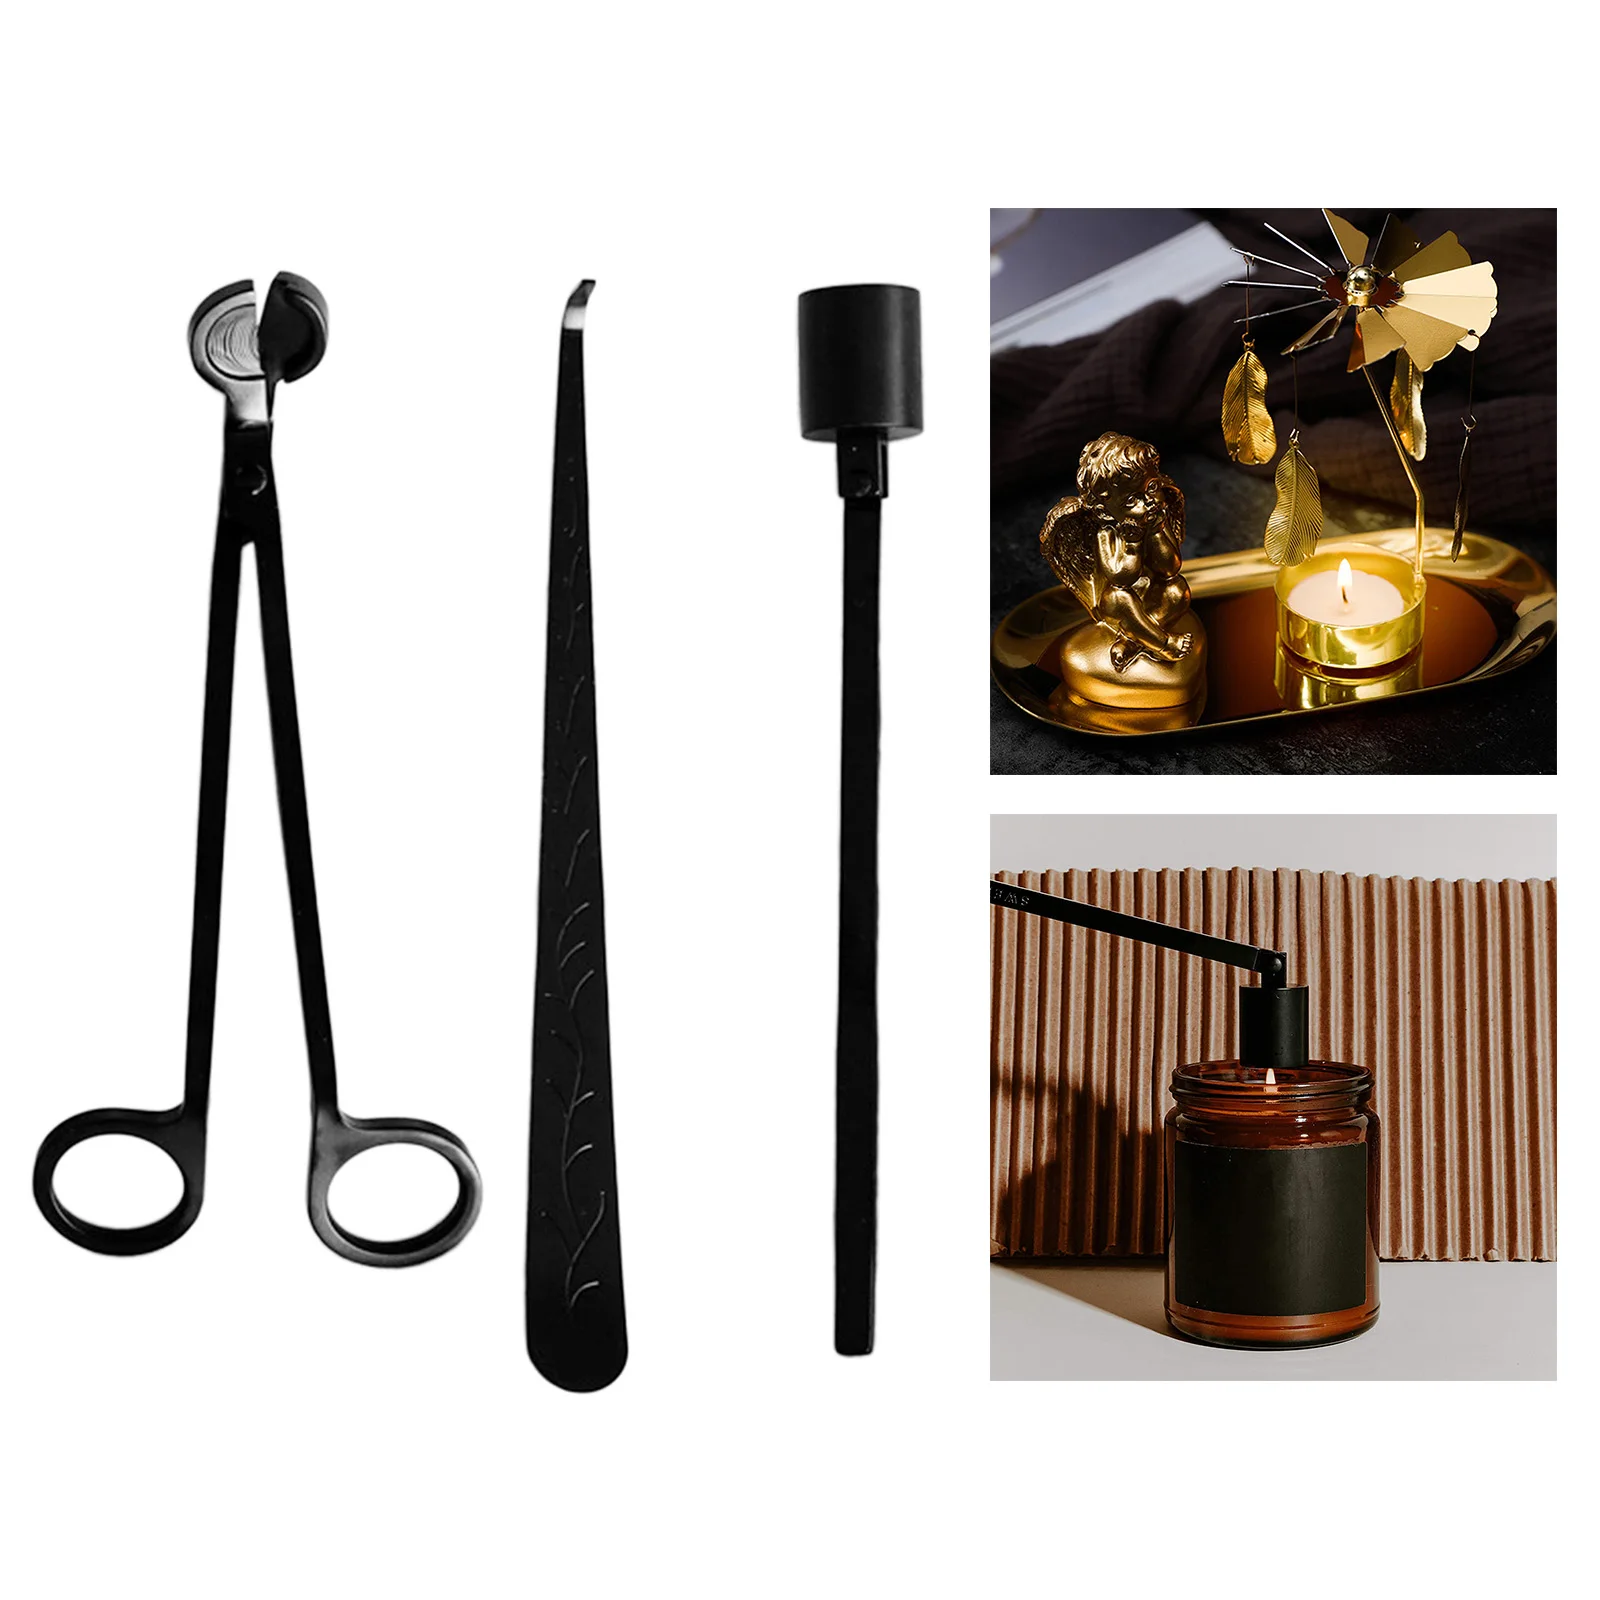 3Pcs/Set Candle Accessory Set Candle Extinguish Tool Candle Wick Snuffer Trimmer Dipper Tools Kit For Home Party Wedding Supply